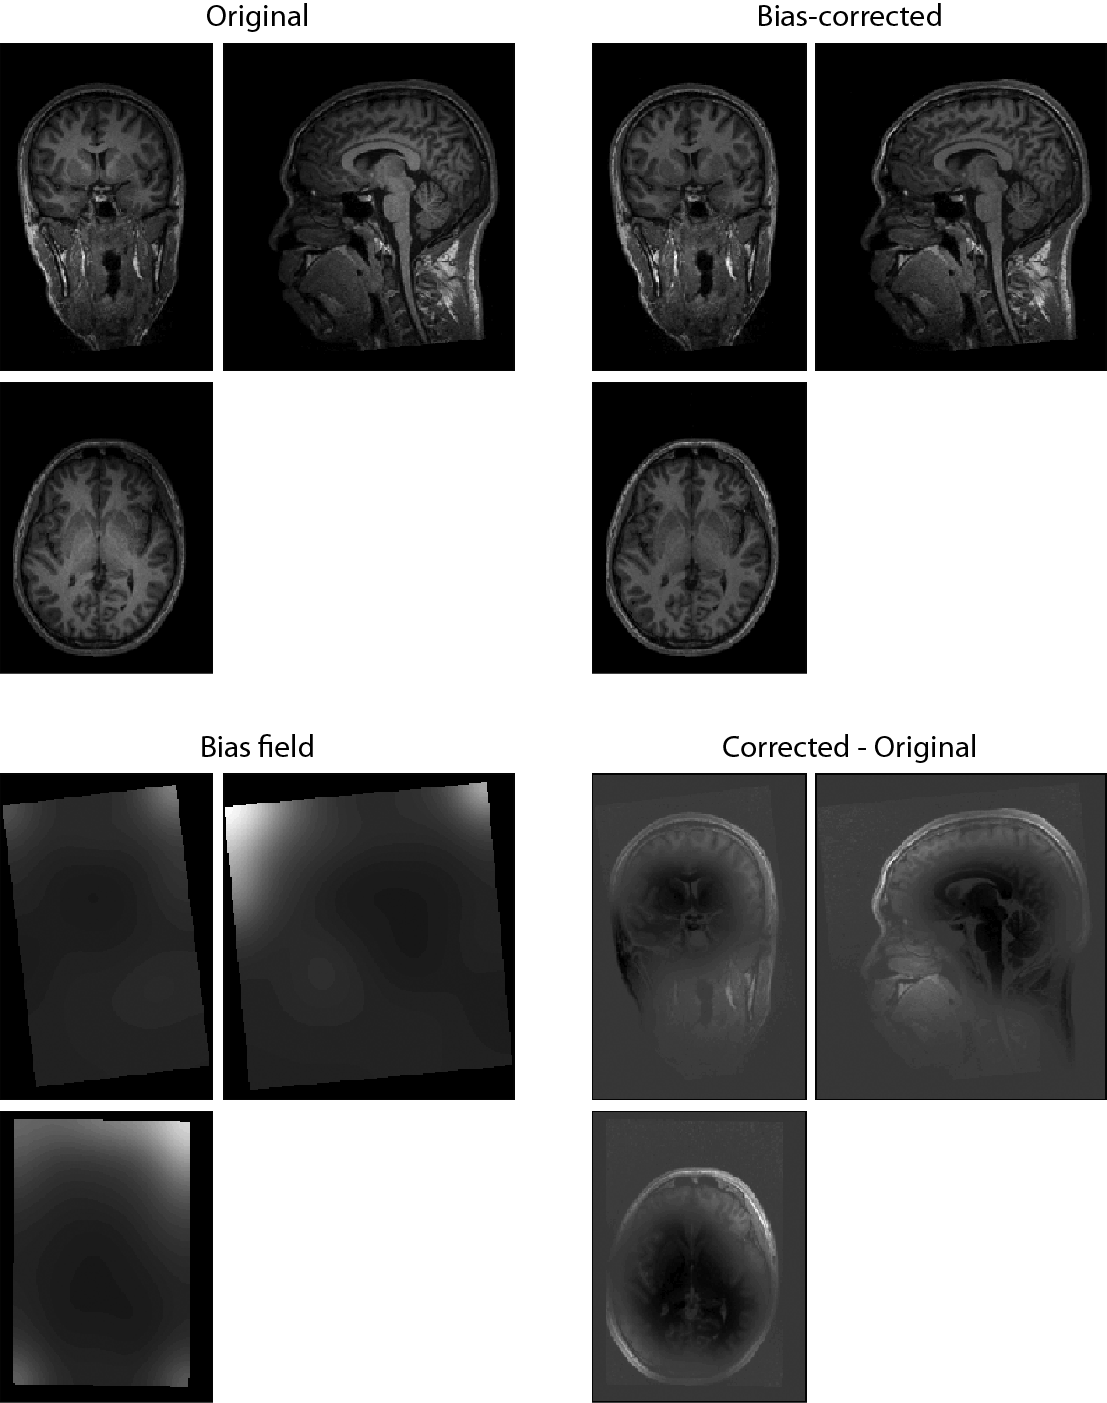 Original T1-weighted MRI image, bias-corrected version, and the estimated bias field